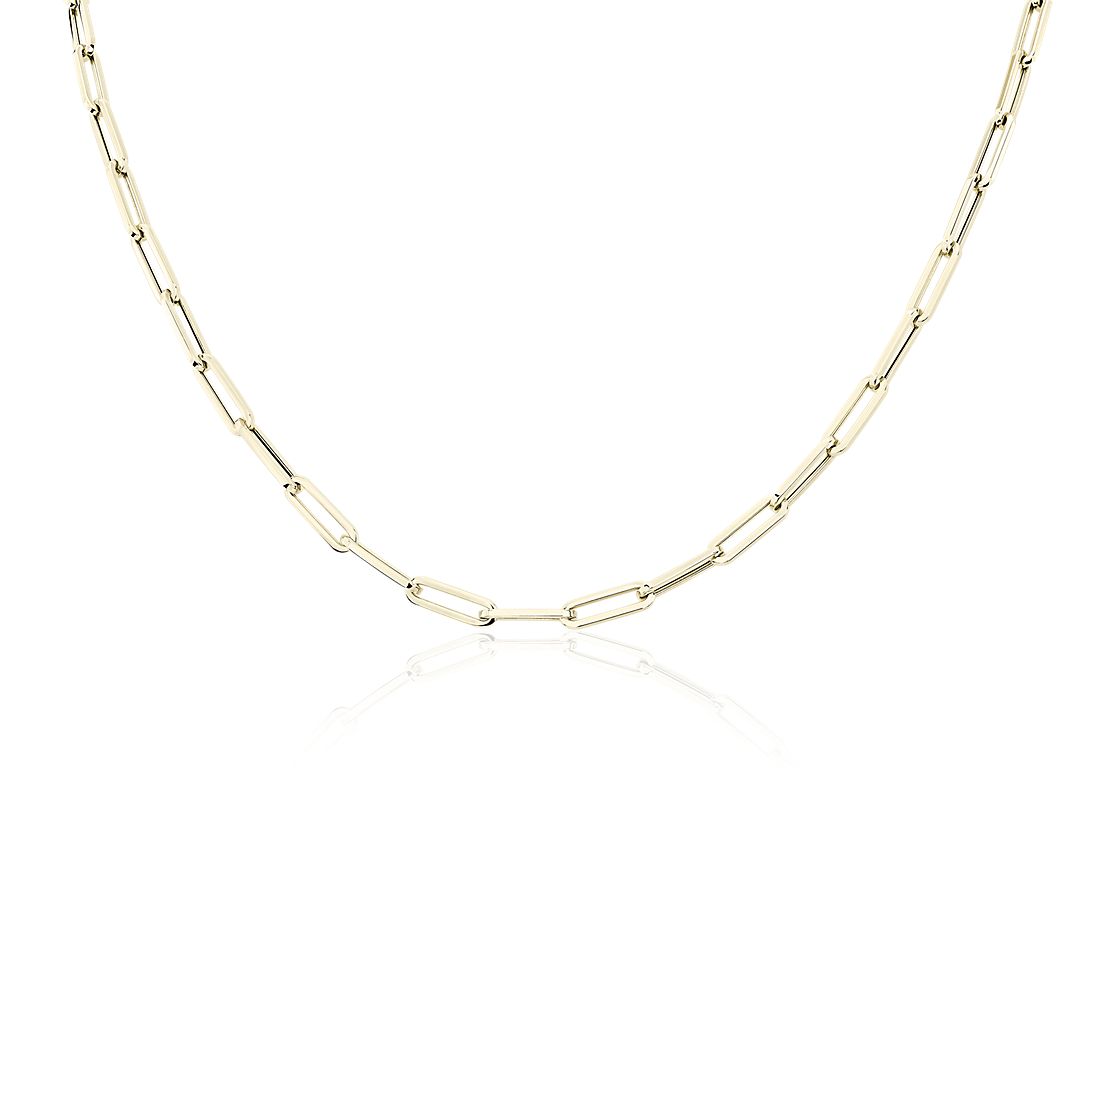 24" Medium Paperclip Necklace in 14k Italian Yellow Gold (3.8 mm)